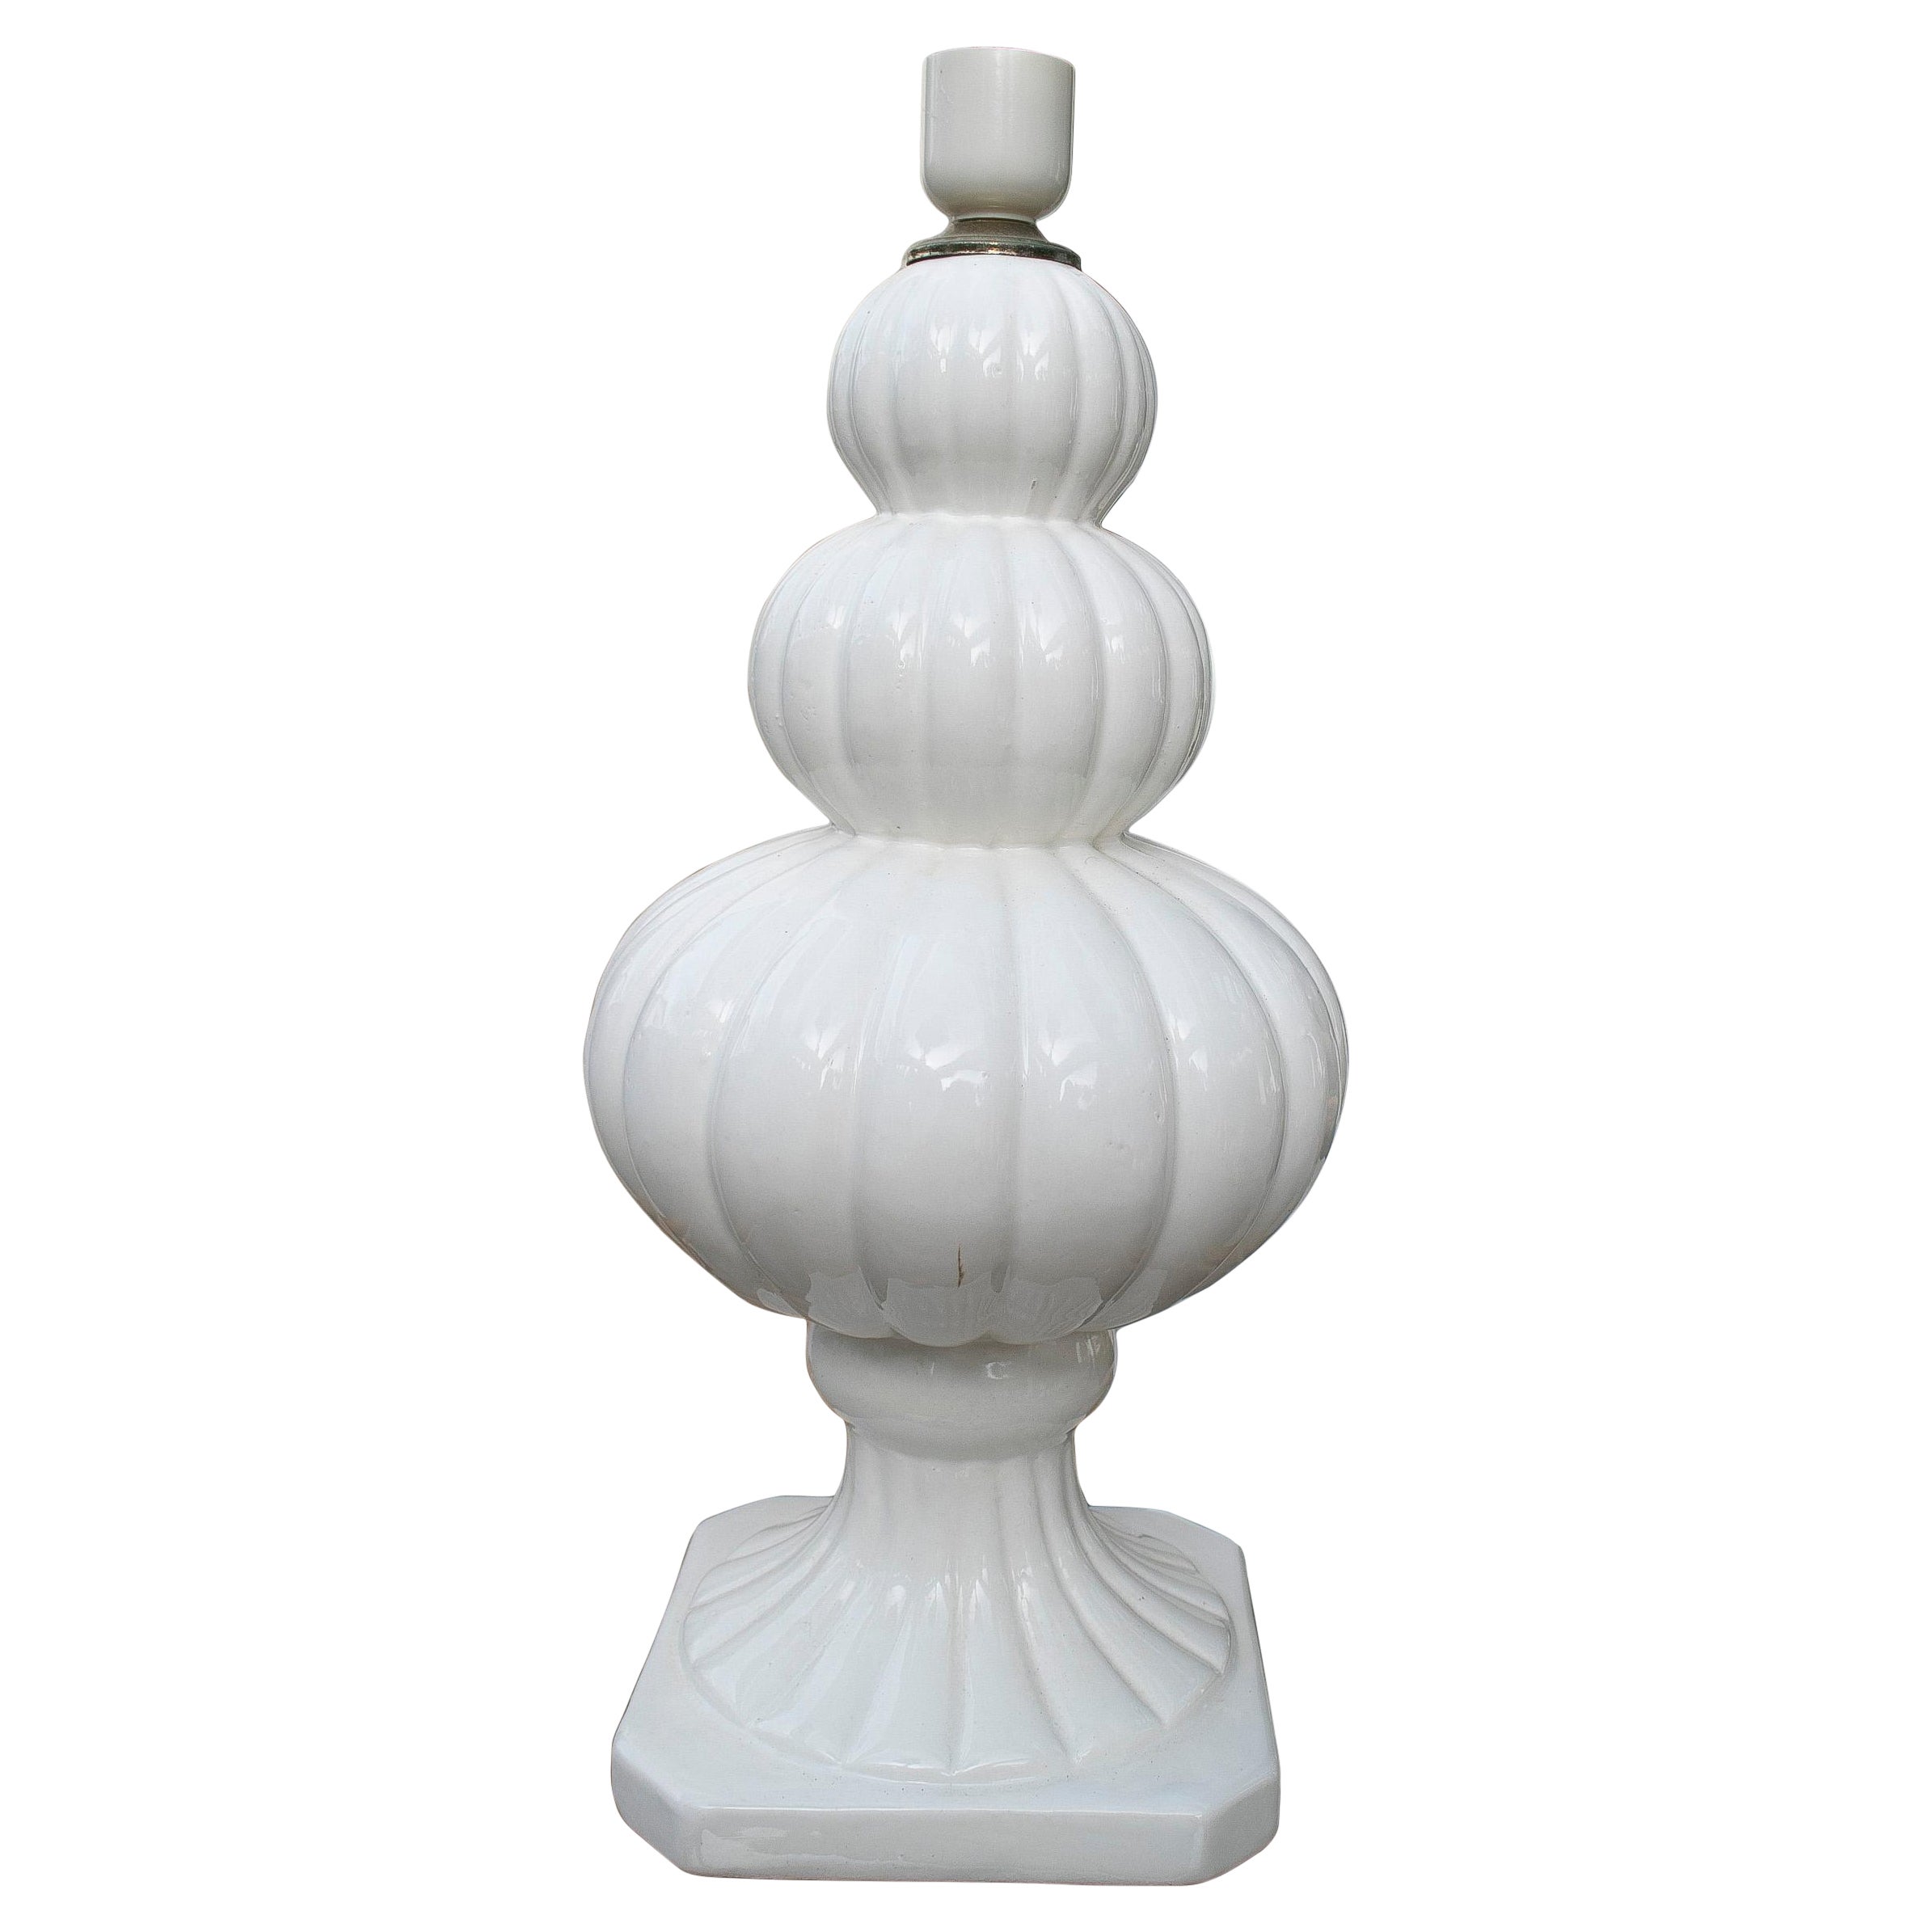 1970's Porcelain Table Lamp in White Colour and with a White Rounded Shape